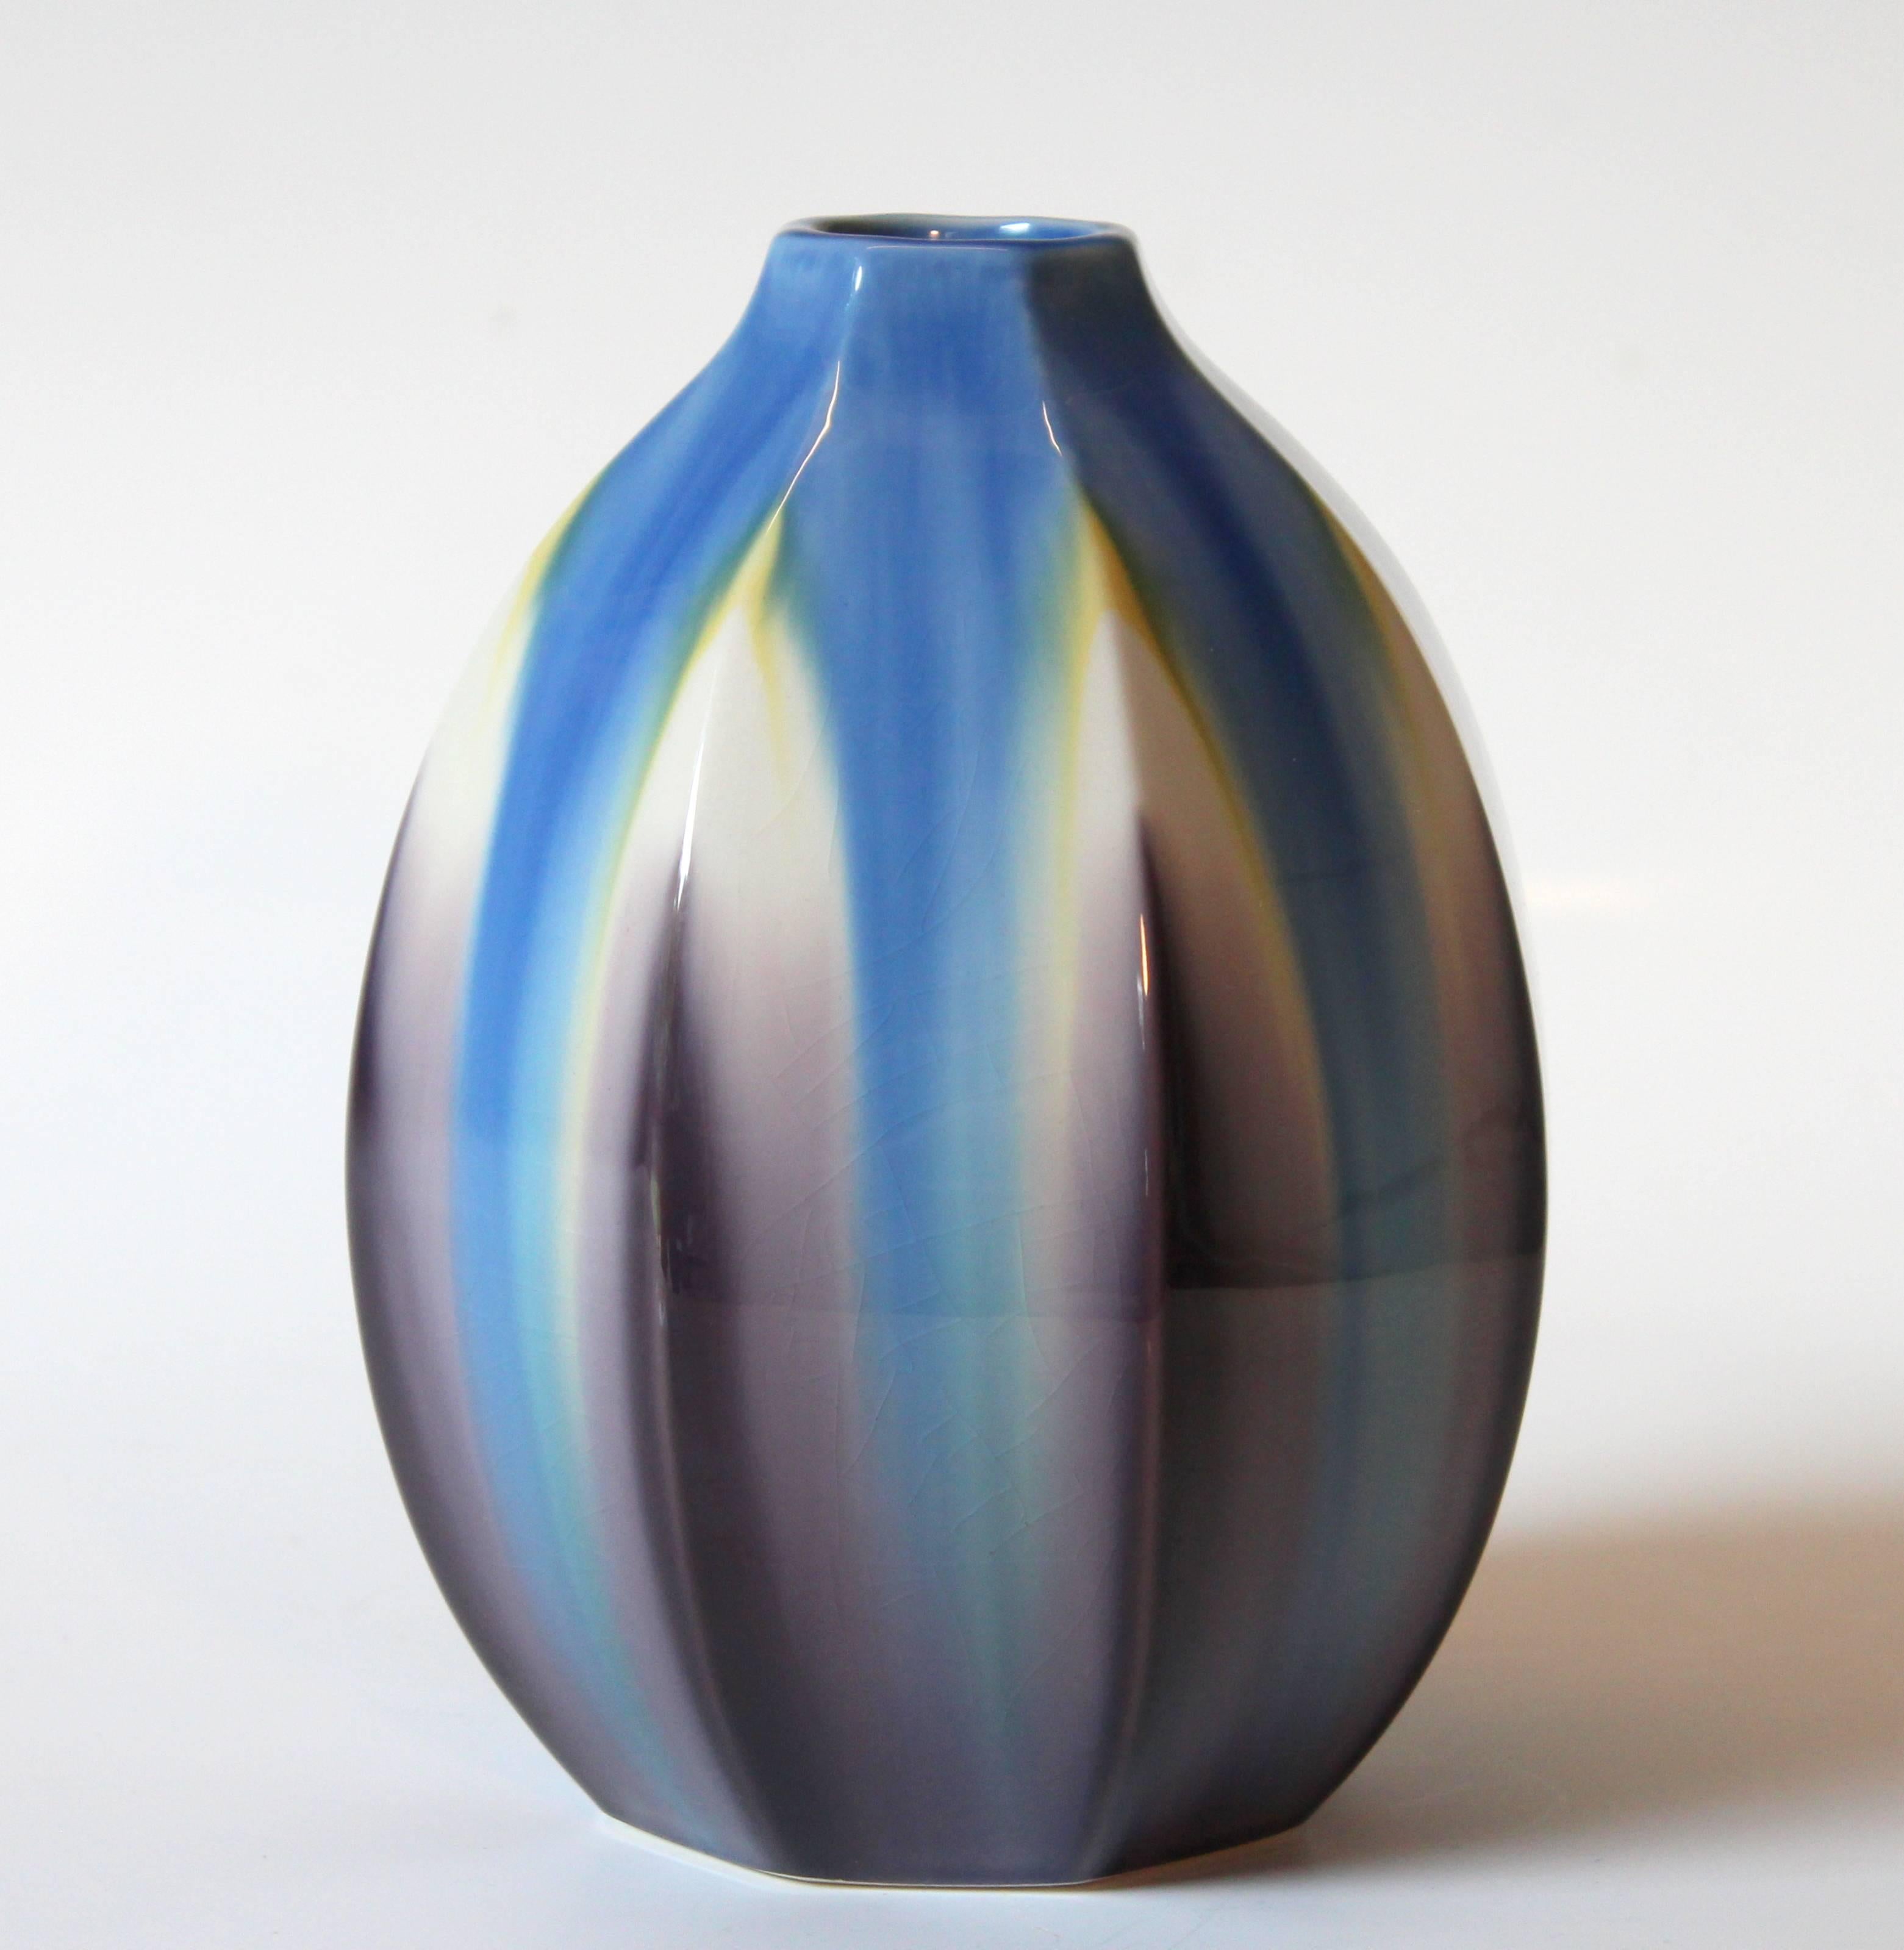 Octagonal Kutani studio porcelain vase by master potter, Hiroshi Shibata. Hand formed and carved into even facets and glazed in Yusai technique with subtle gradation between the different colored glazes, circa 1990. Finely hand-painted 